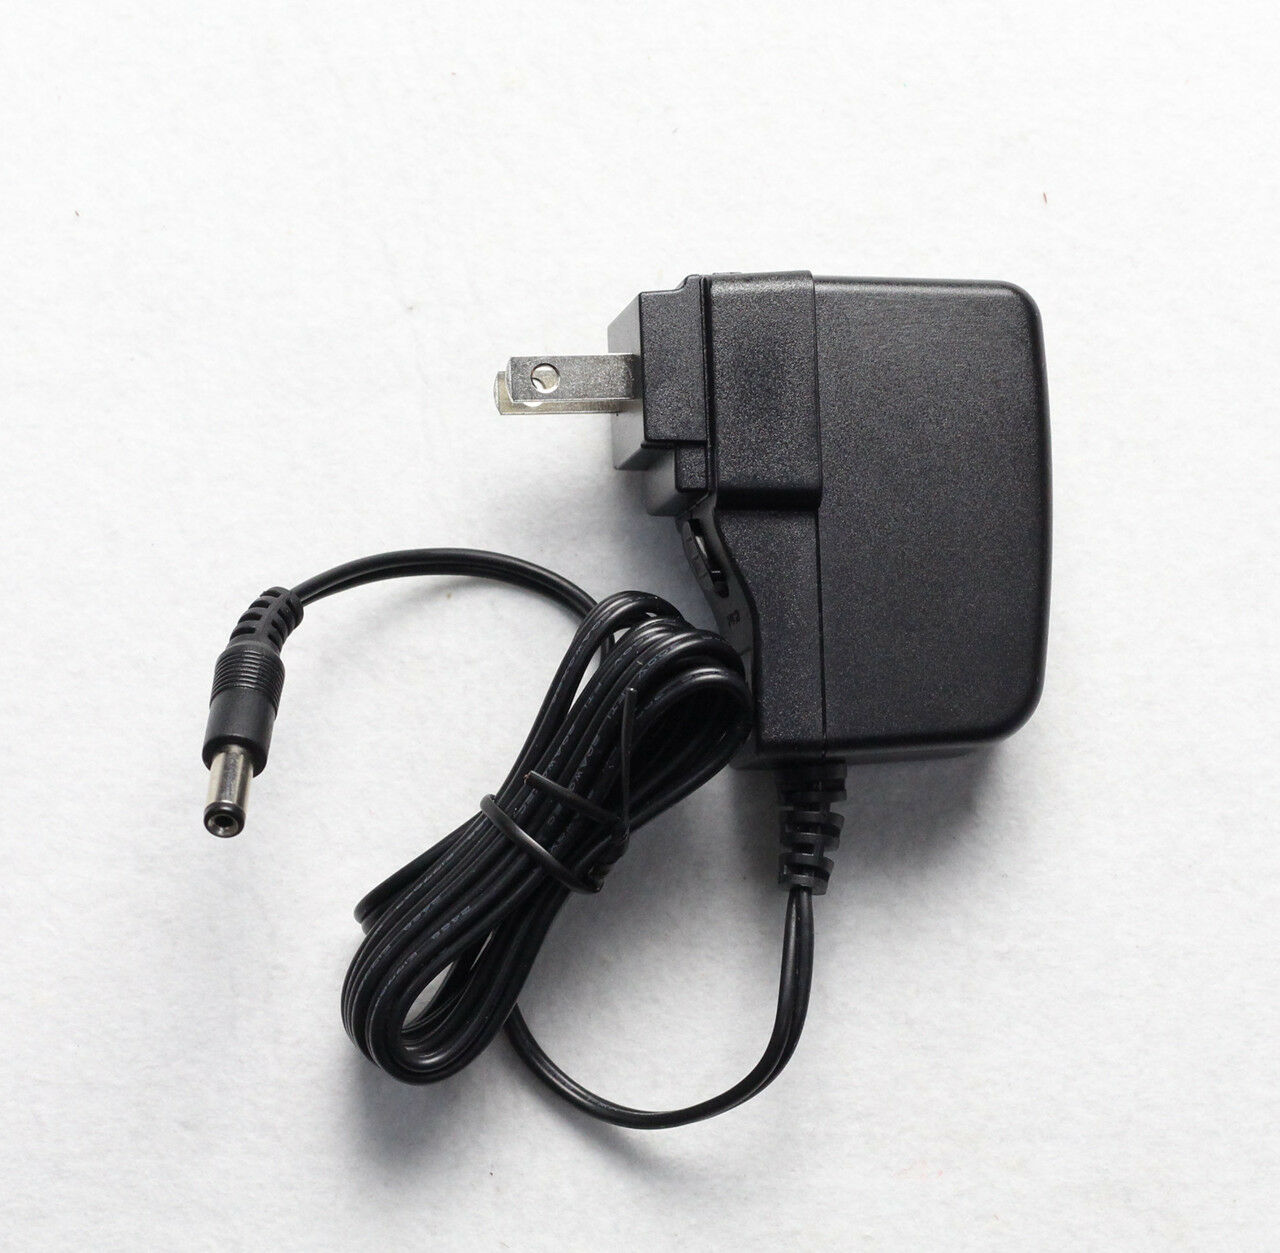 AC Adapter for Omron Healthcare Upper Arm Blood Pressure Monitor 5 7 10 Series Input 1A UPC 6958104826023 EAN 695810482